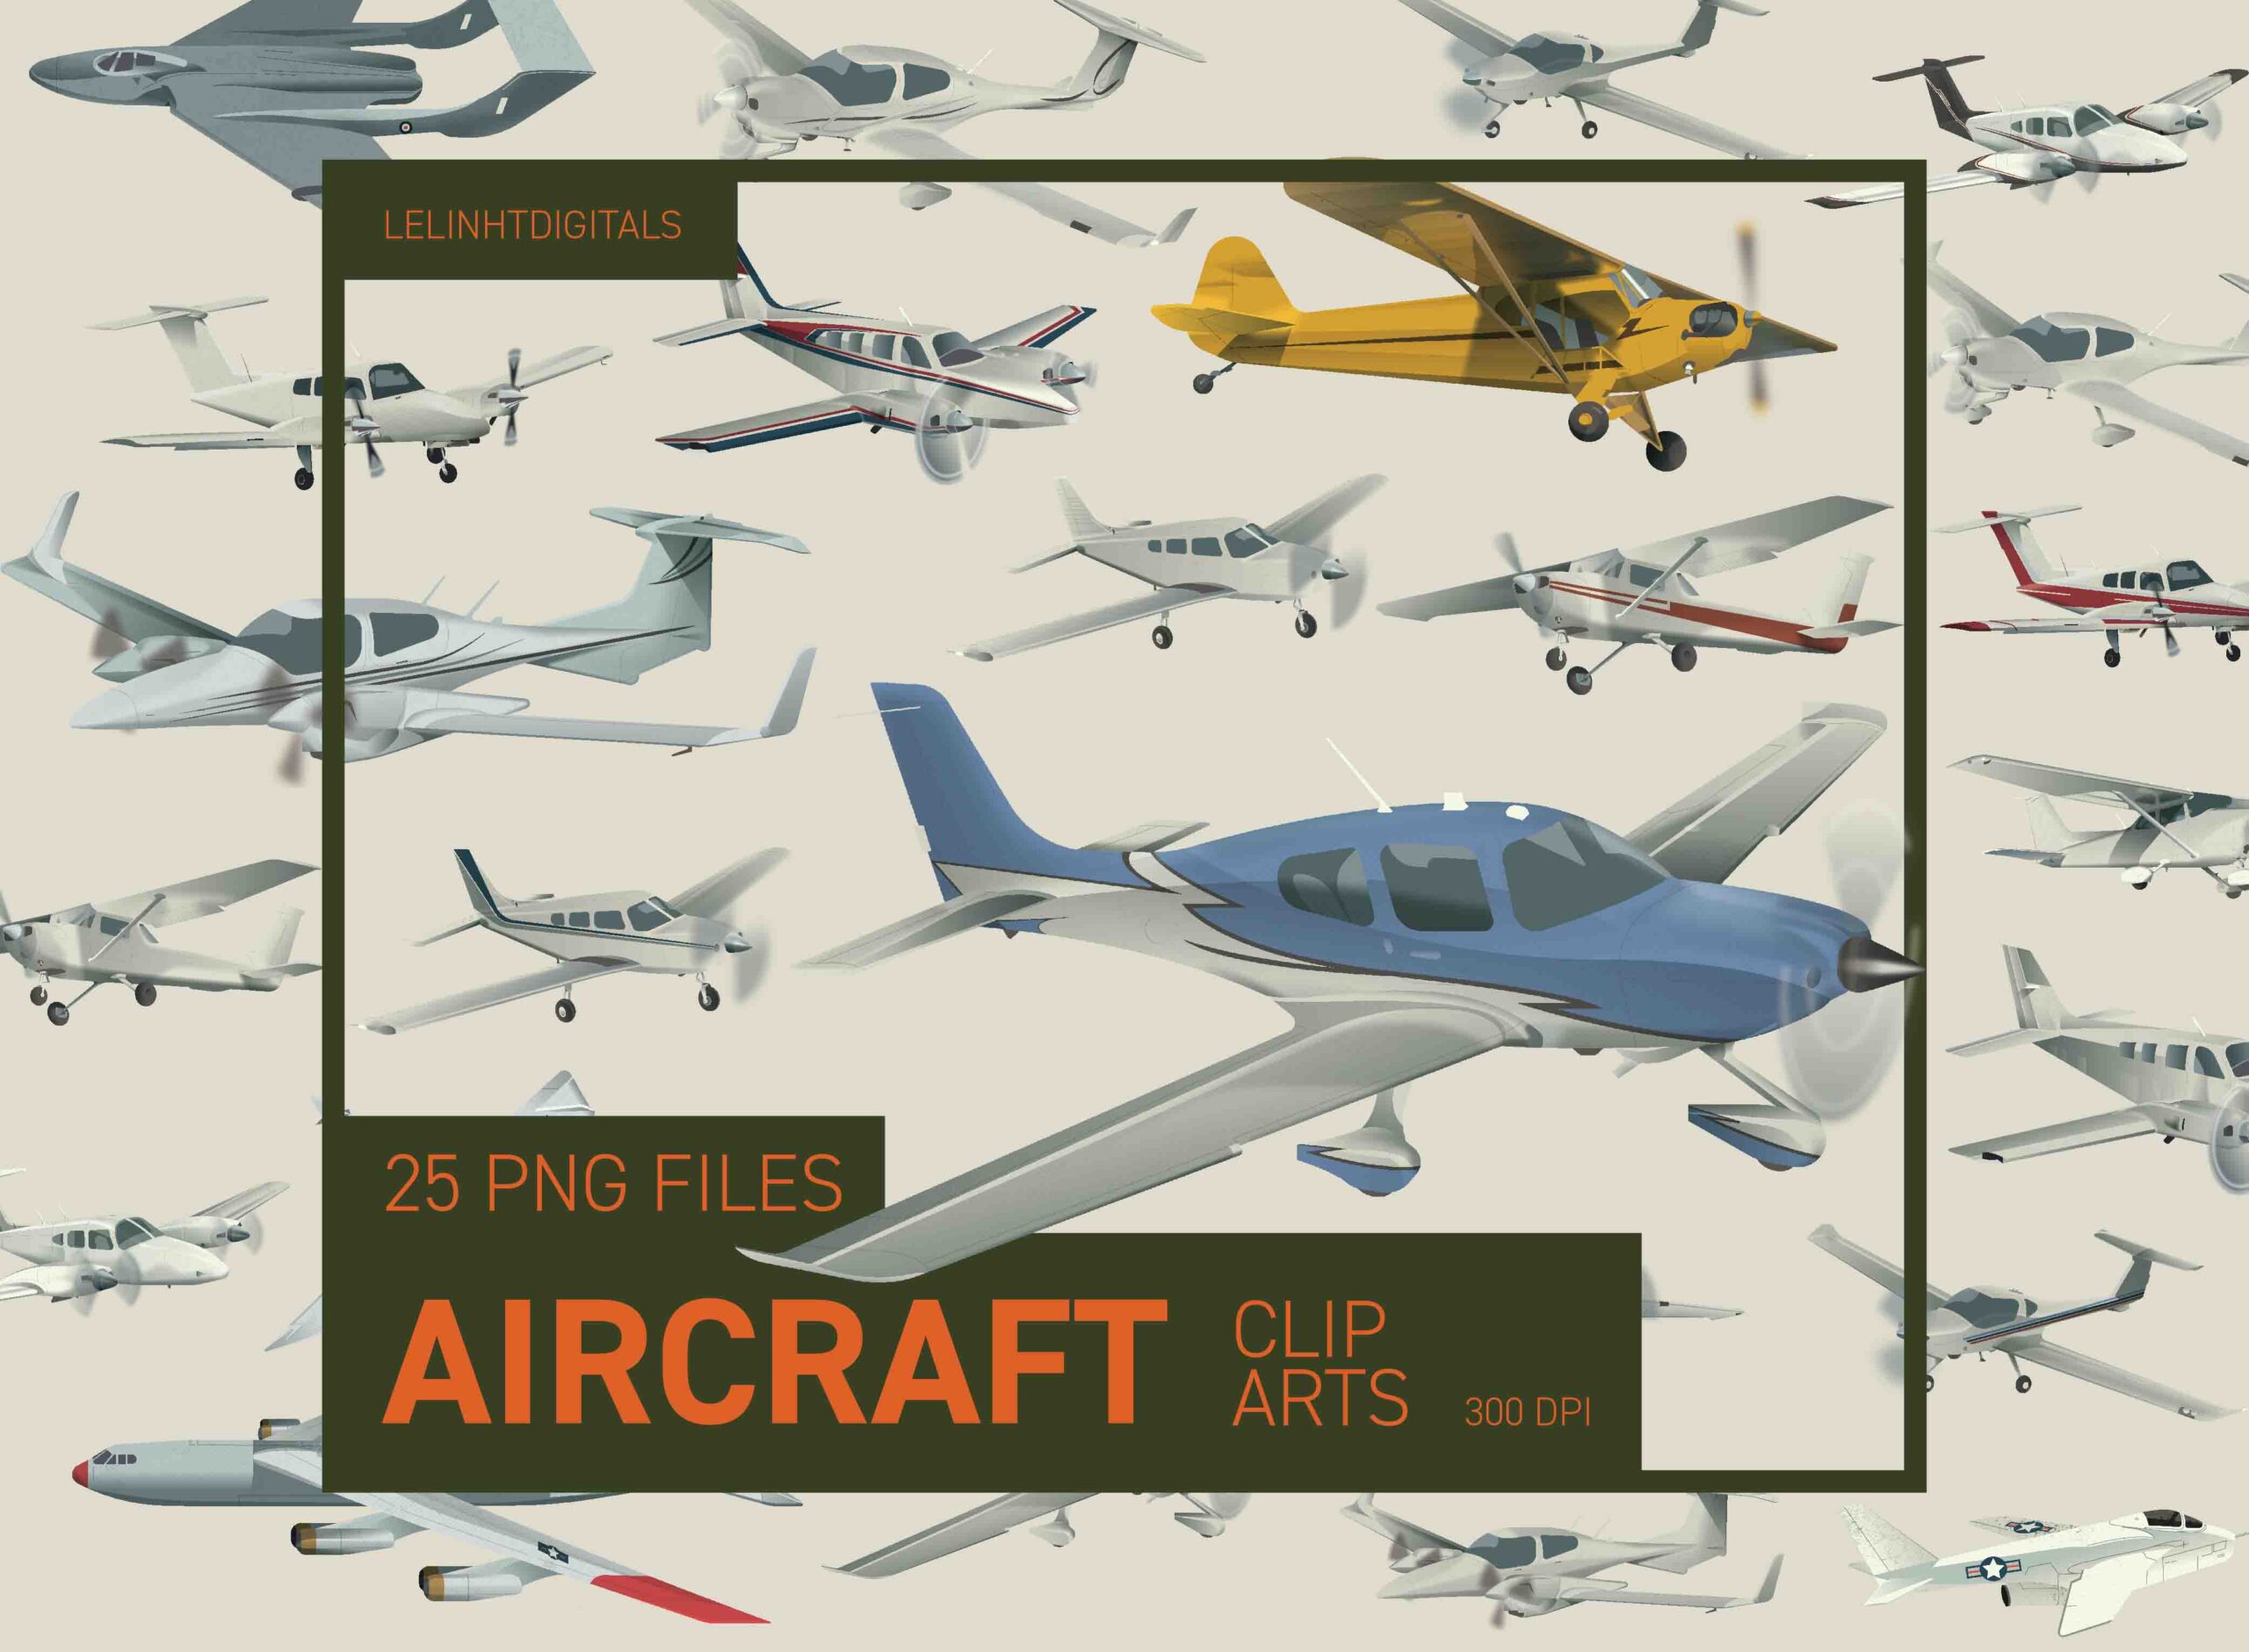 Aircraft-listing-lelinhtdigitals_feature-image-aircraft-airplane-clip-arts-png-files